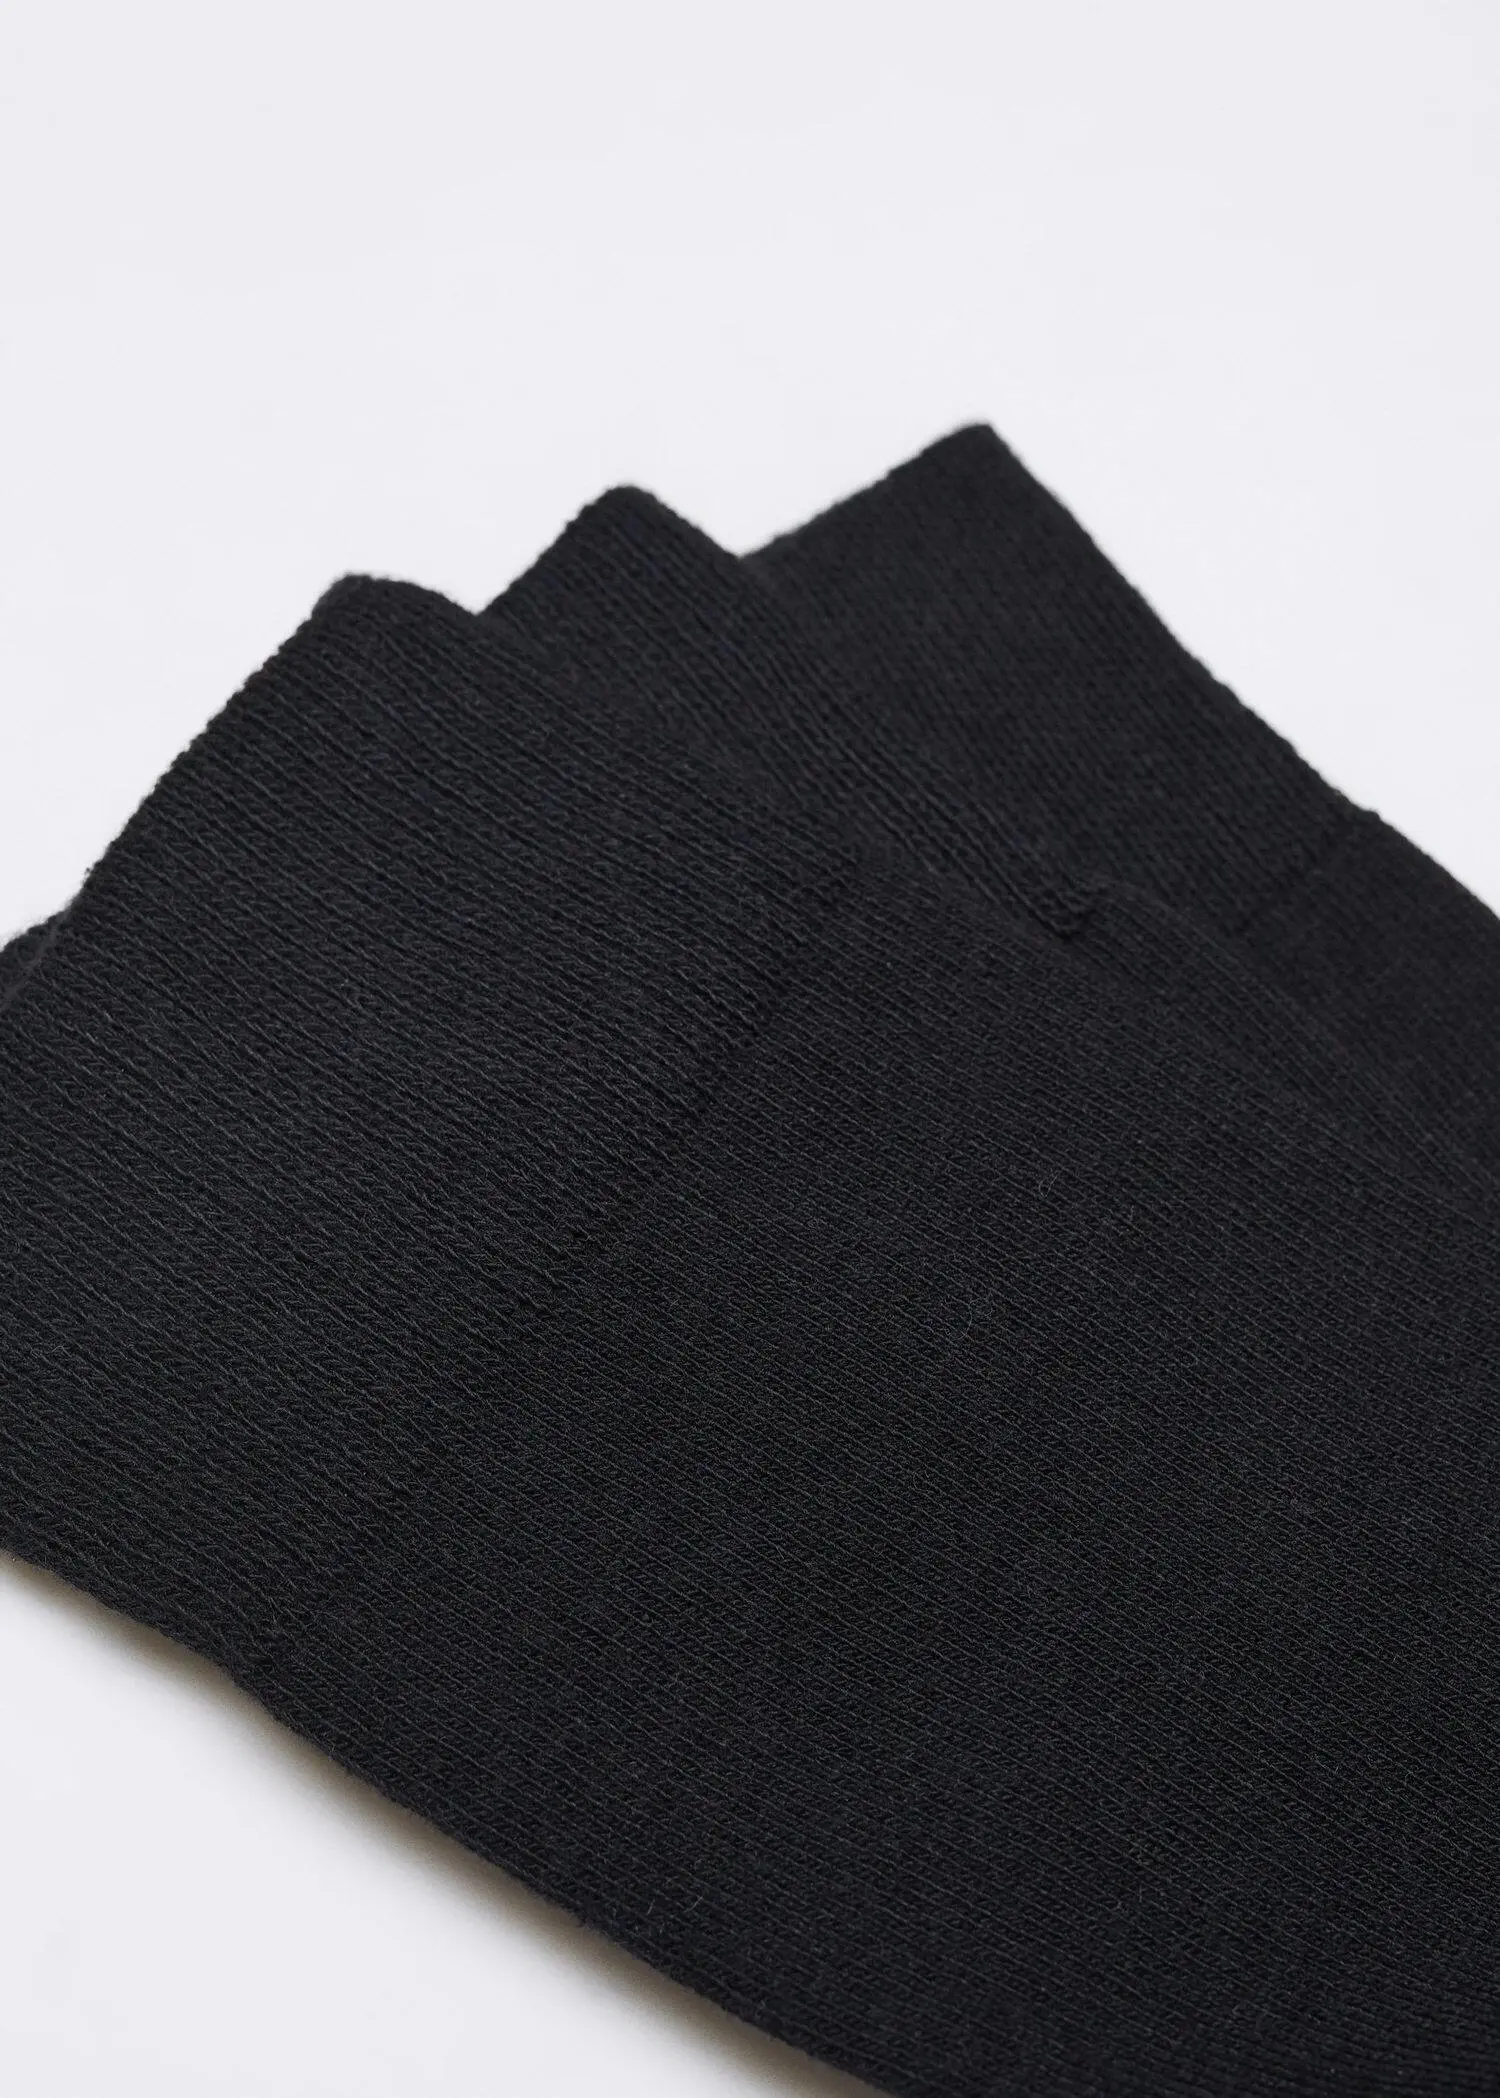 Mango Pack of 3 cotton socks. a close-up view of a black cloth on a table. 